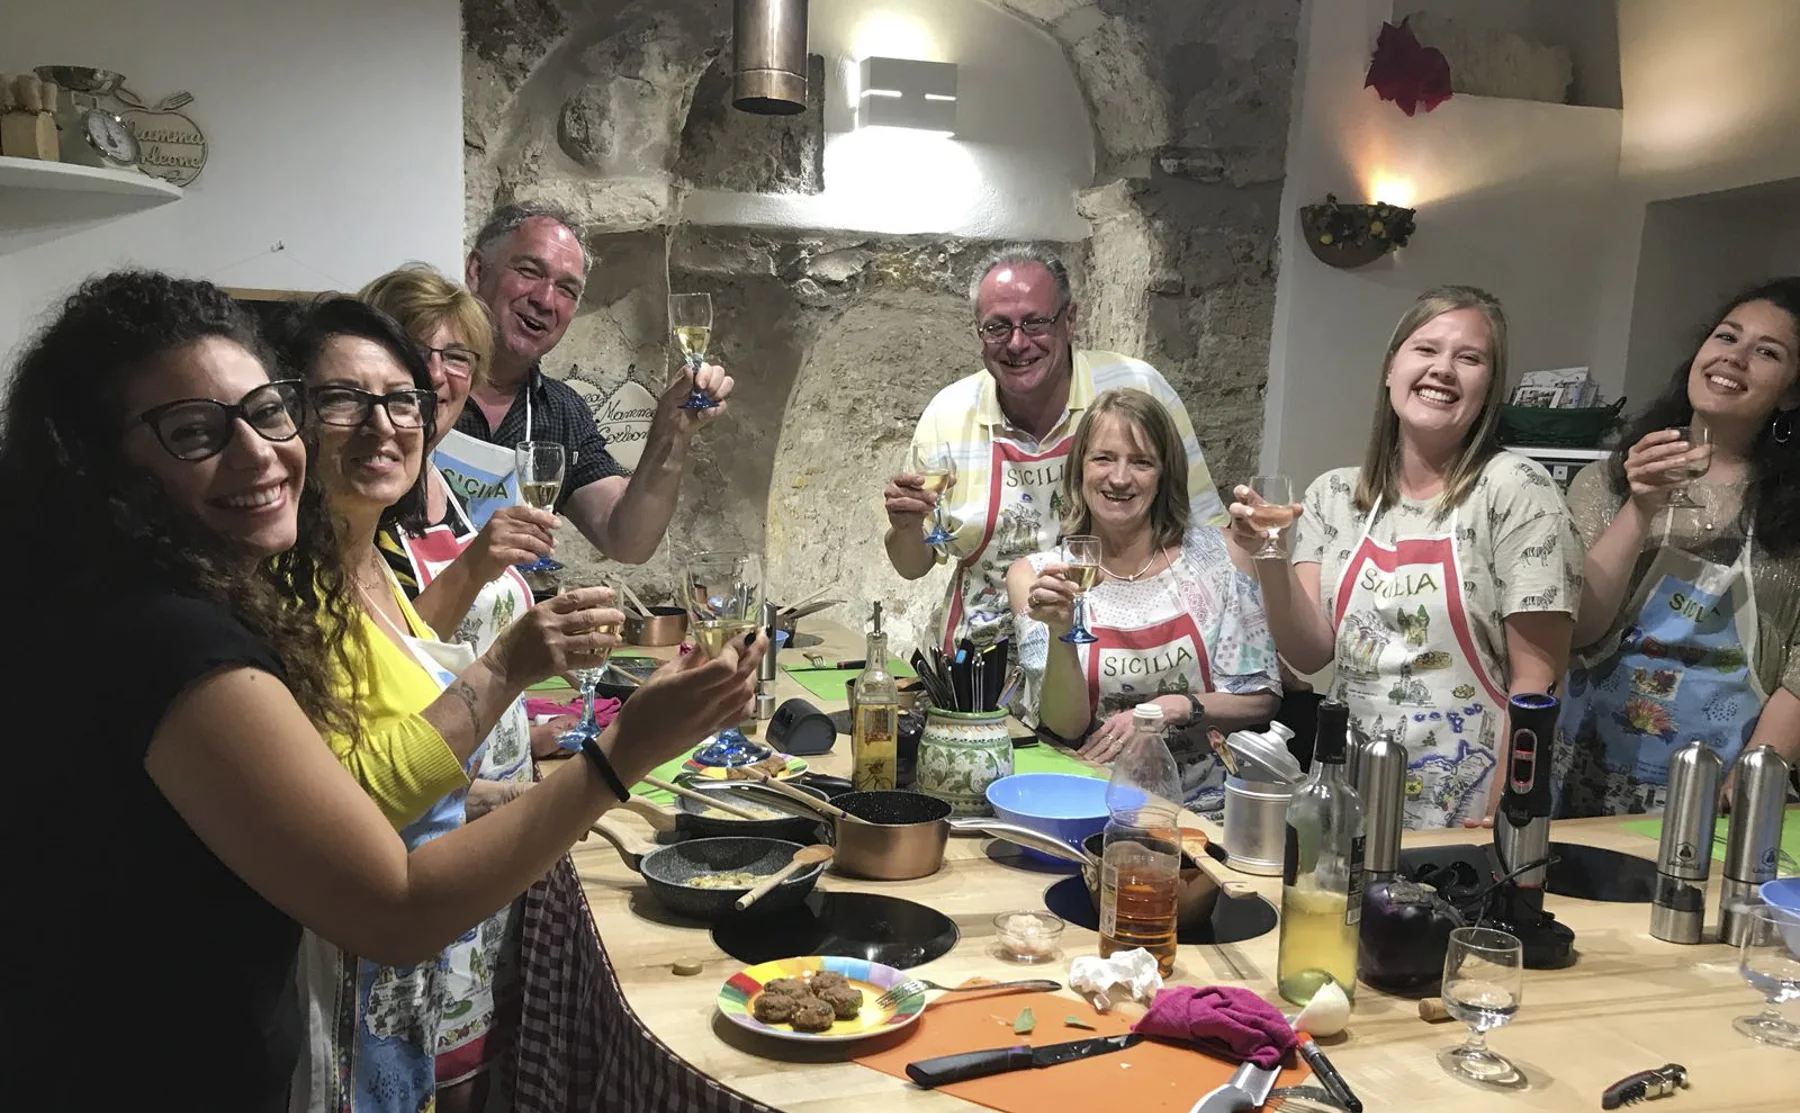 Morning pasta cooking class with a Mamma in Palermo - 1304462